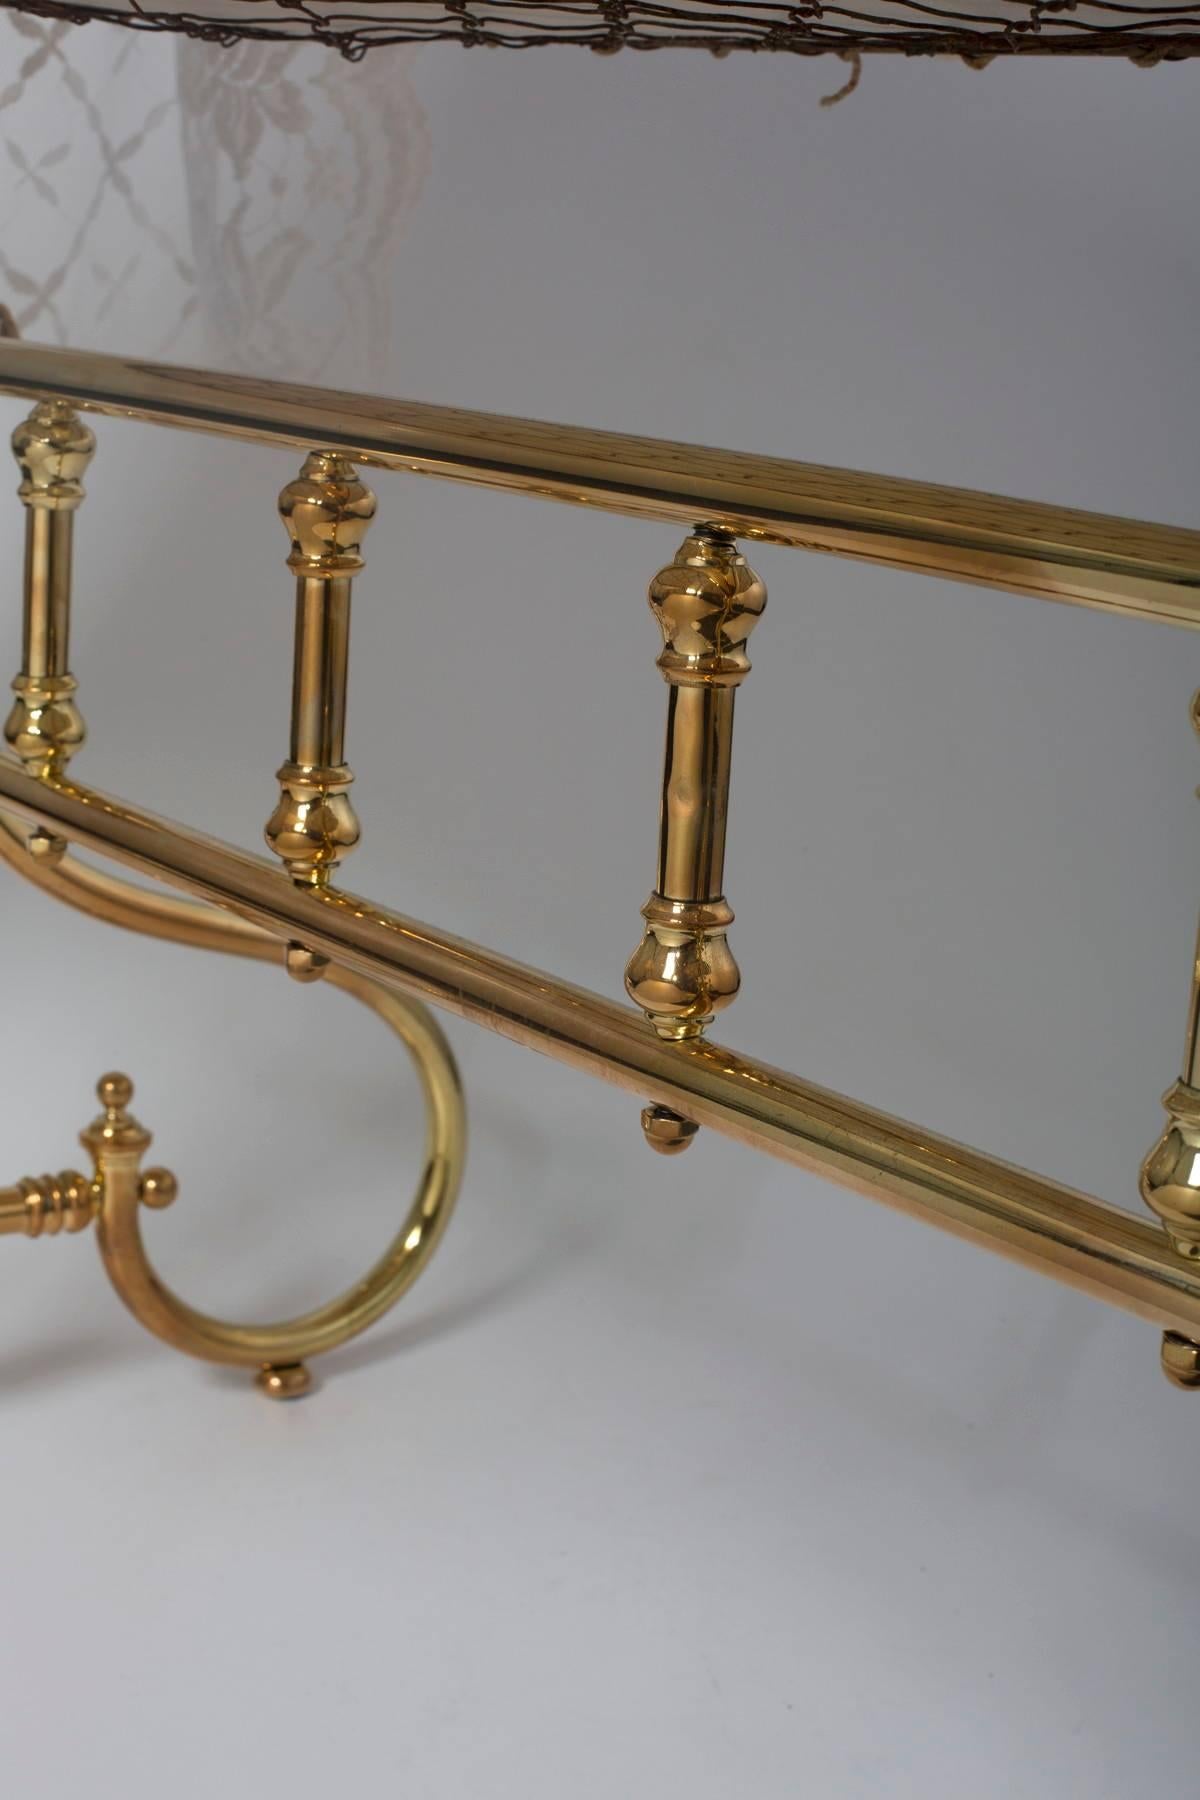 American Victorian Brass Bedroom Infant Bassinet 19th Century For Sale ...